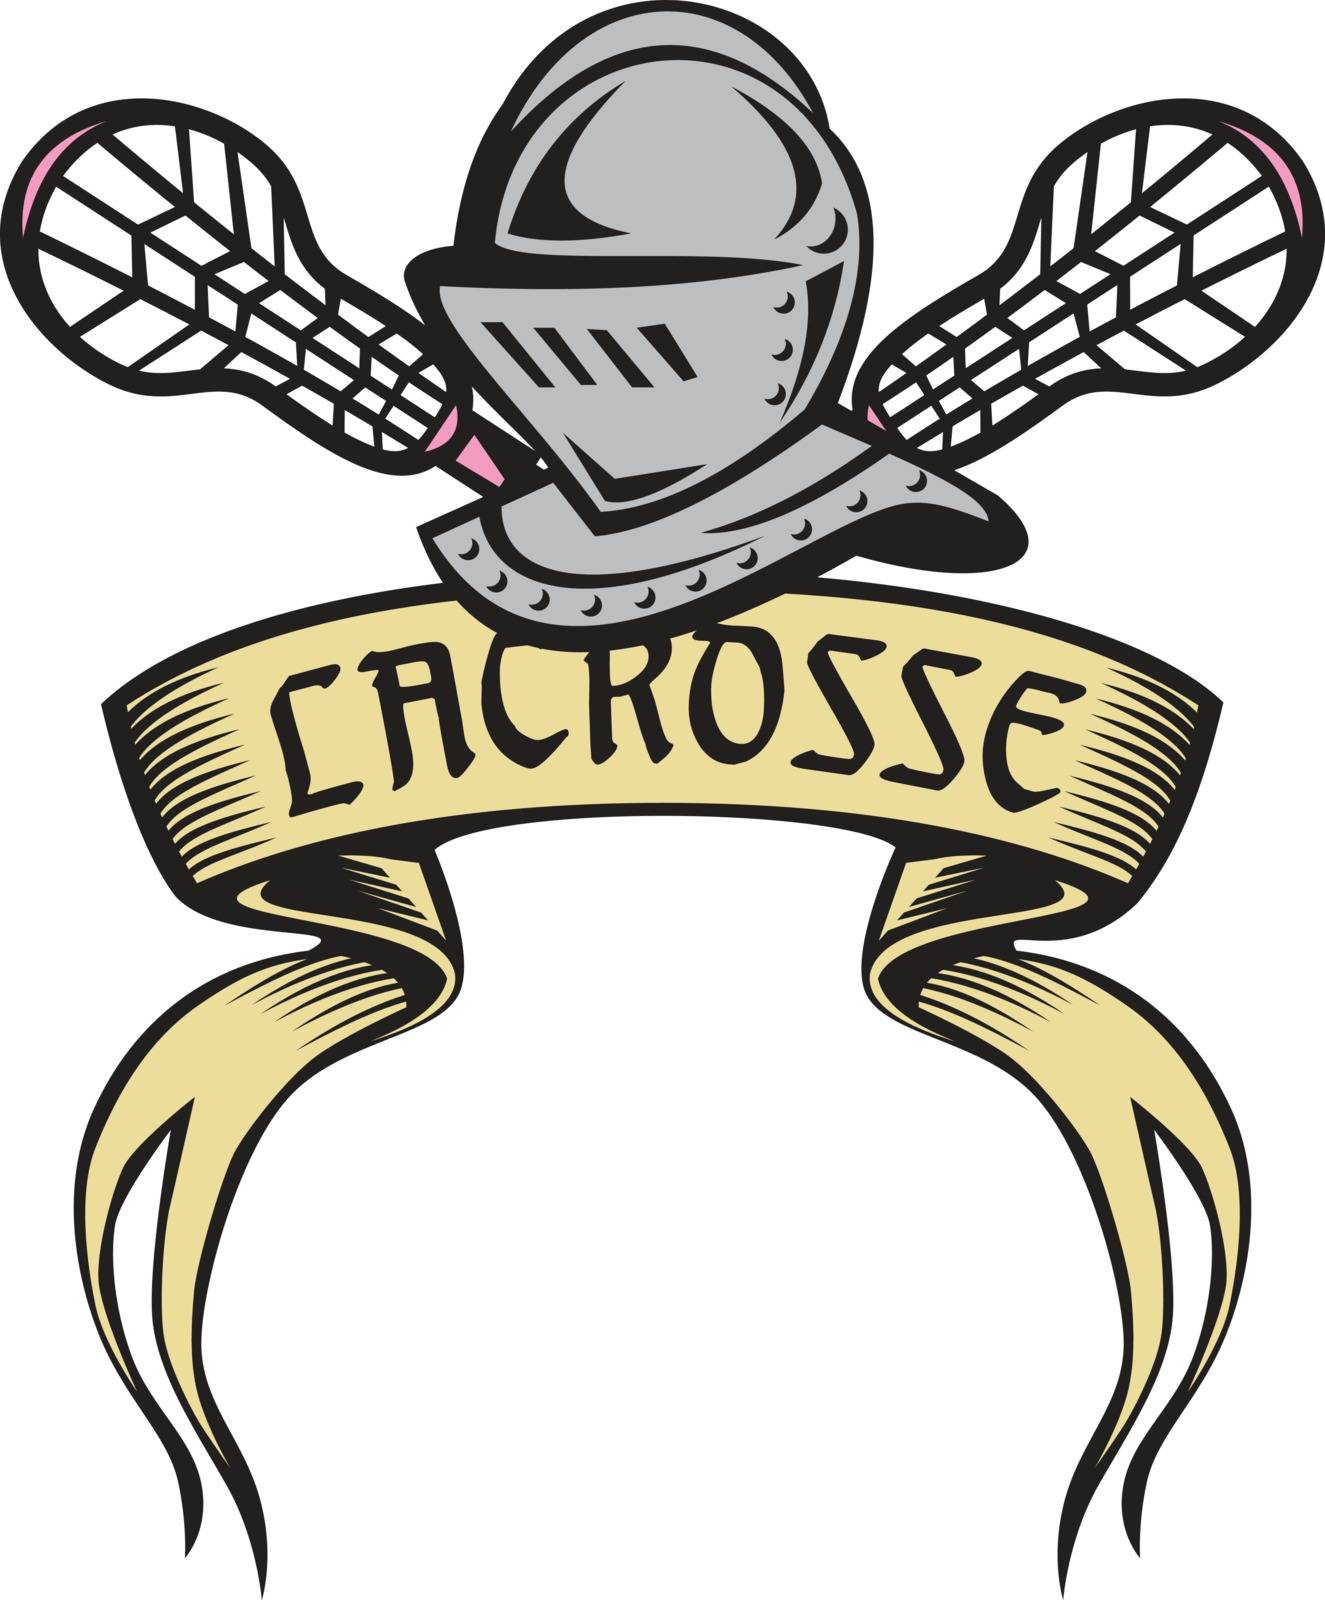 Illustration of a knight armor helmet with crossed lacrosse stick set on isolated white background the word text Lacrosse written in ribbon. 

